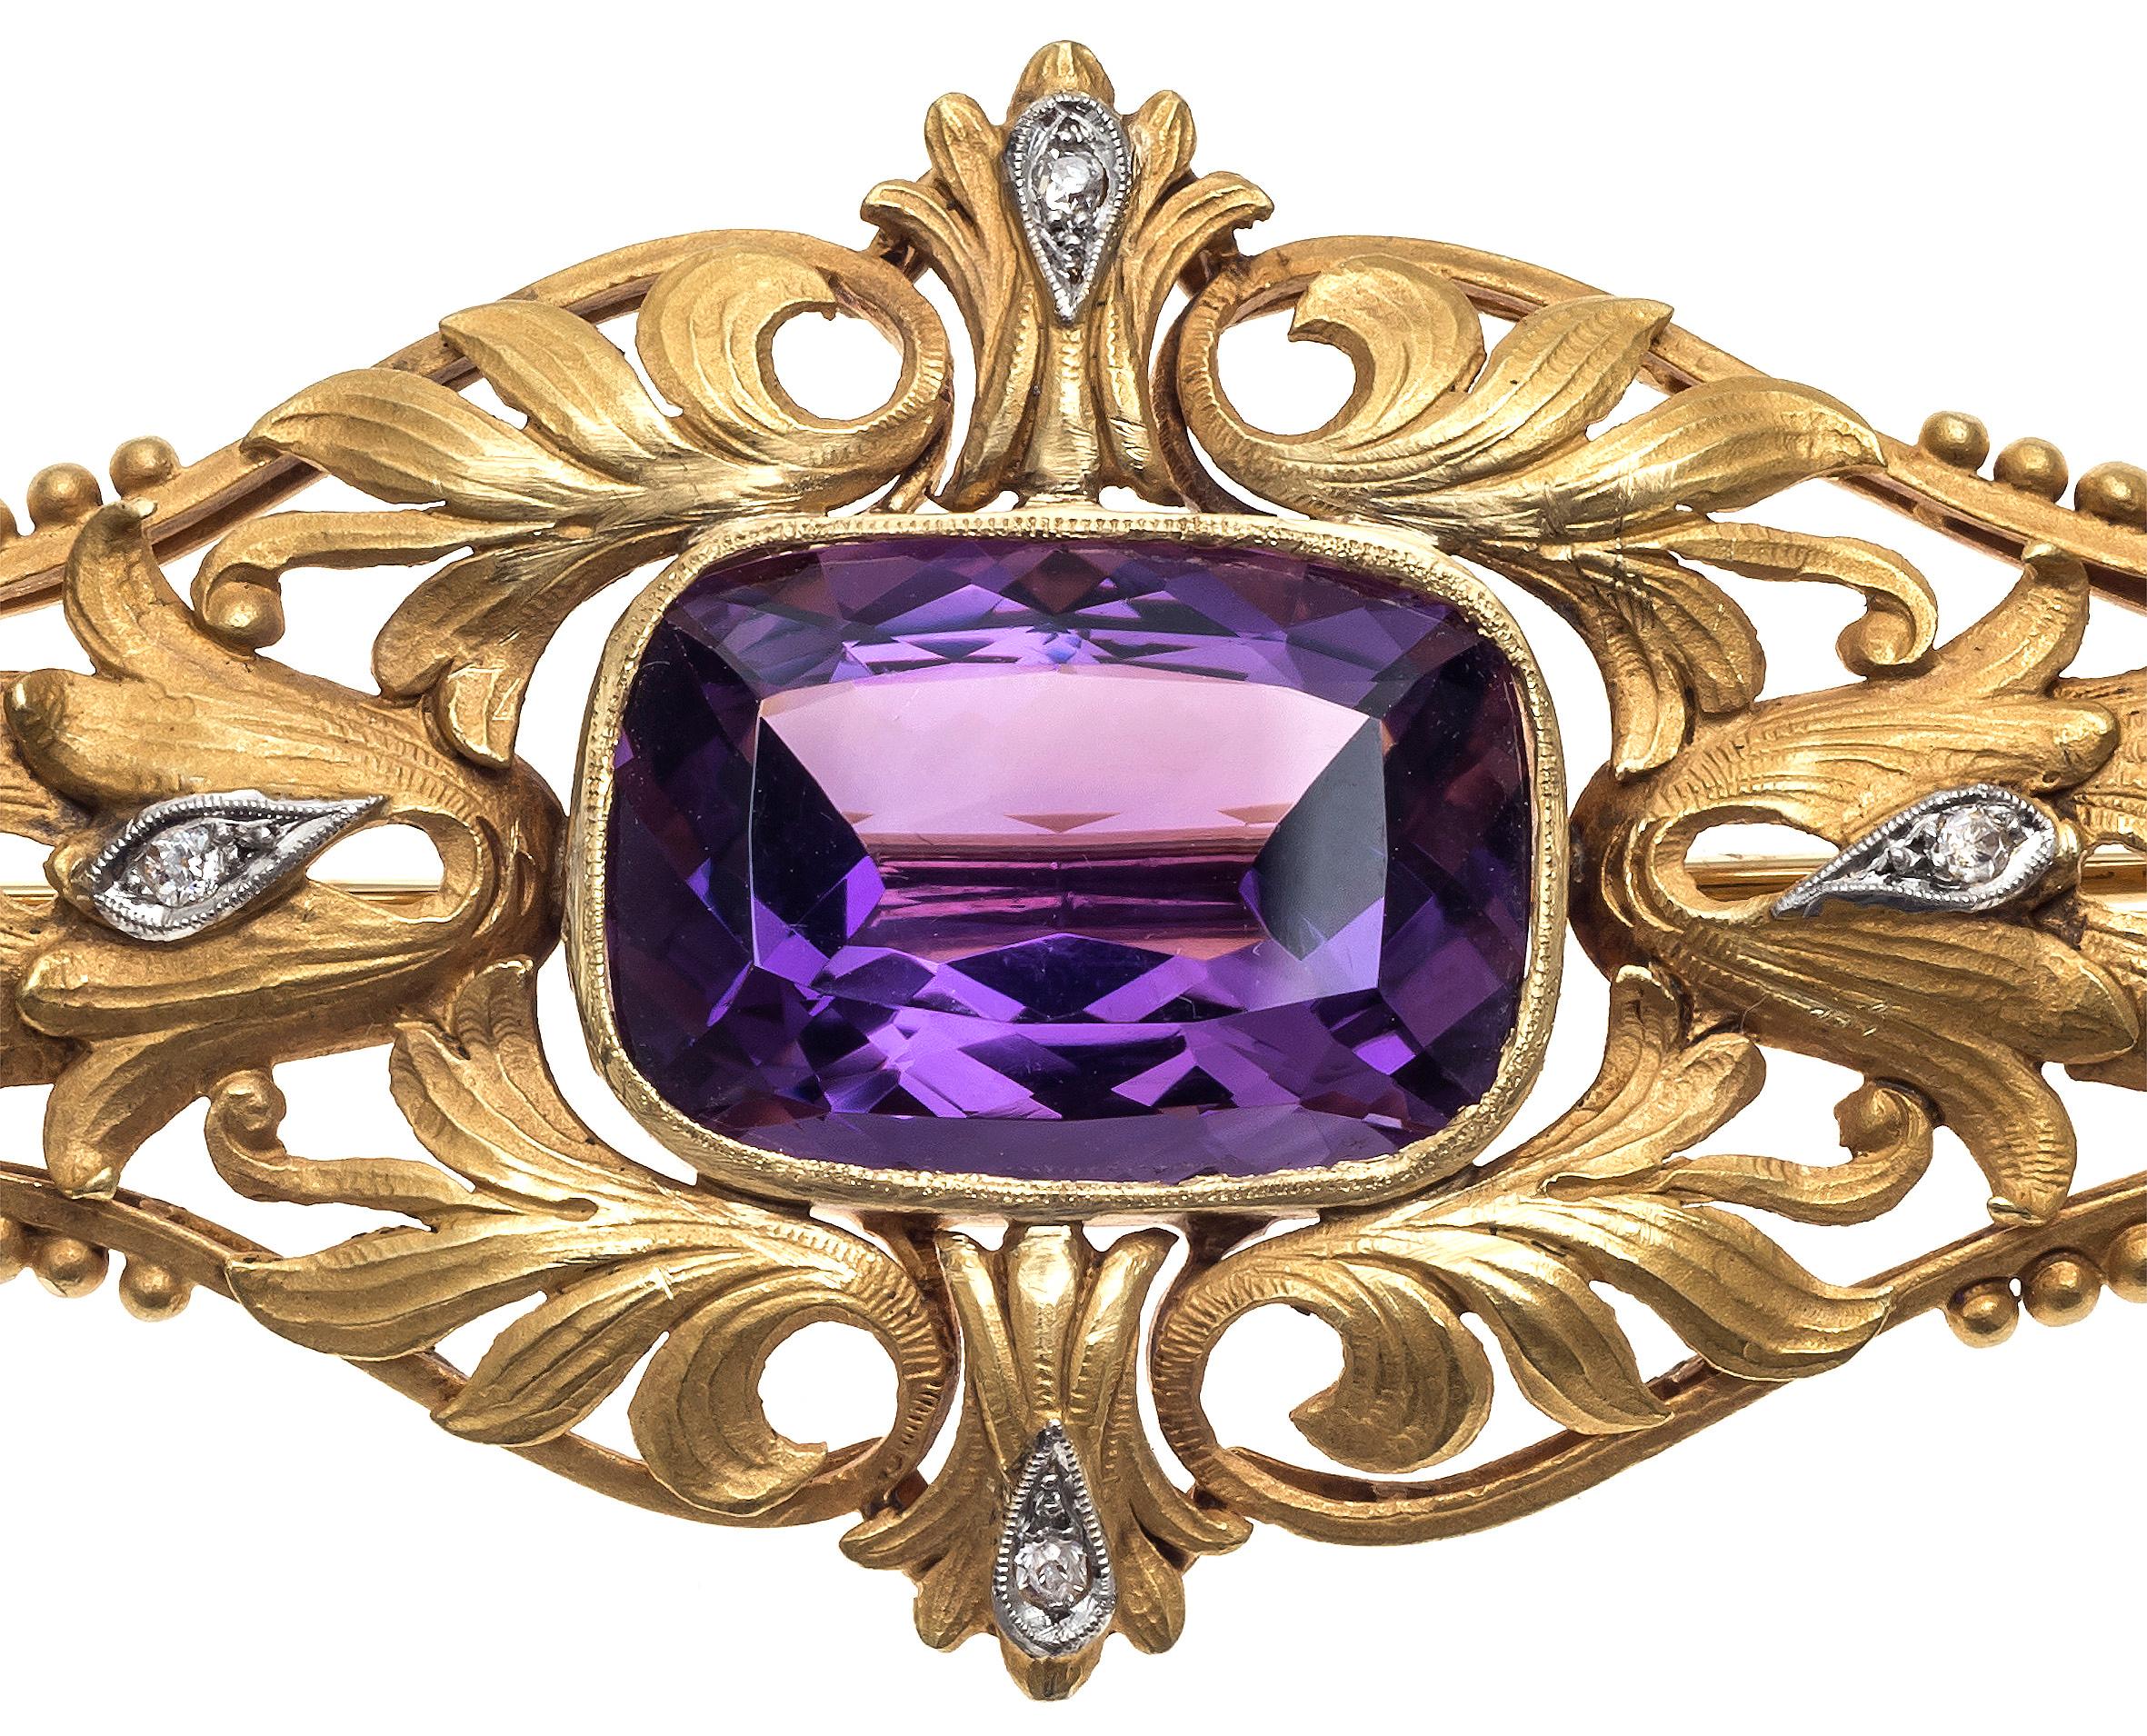 Finely chiselled Art Nouveau 18K gold brooch with a rectangular faceted amethyst. Finely modelled roses, leaves and foliage. Six diamonds are mounted in platinum.

